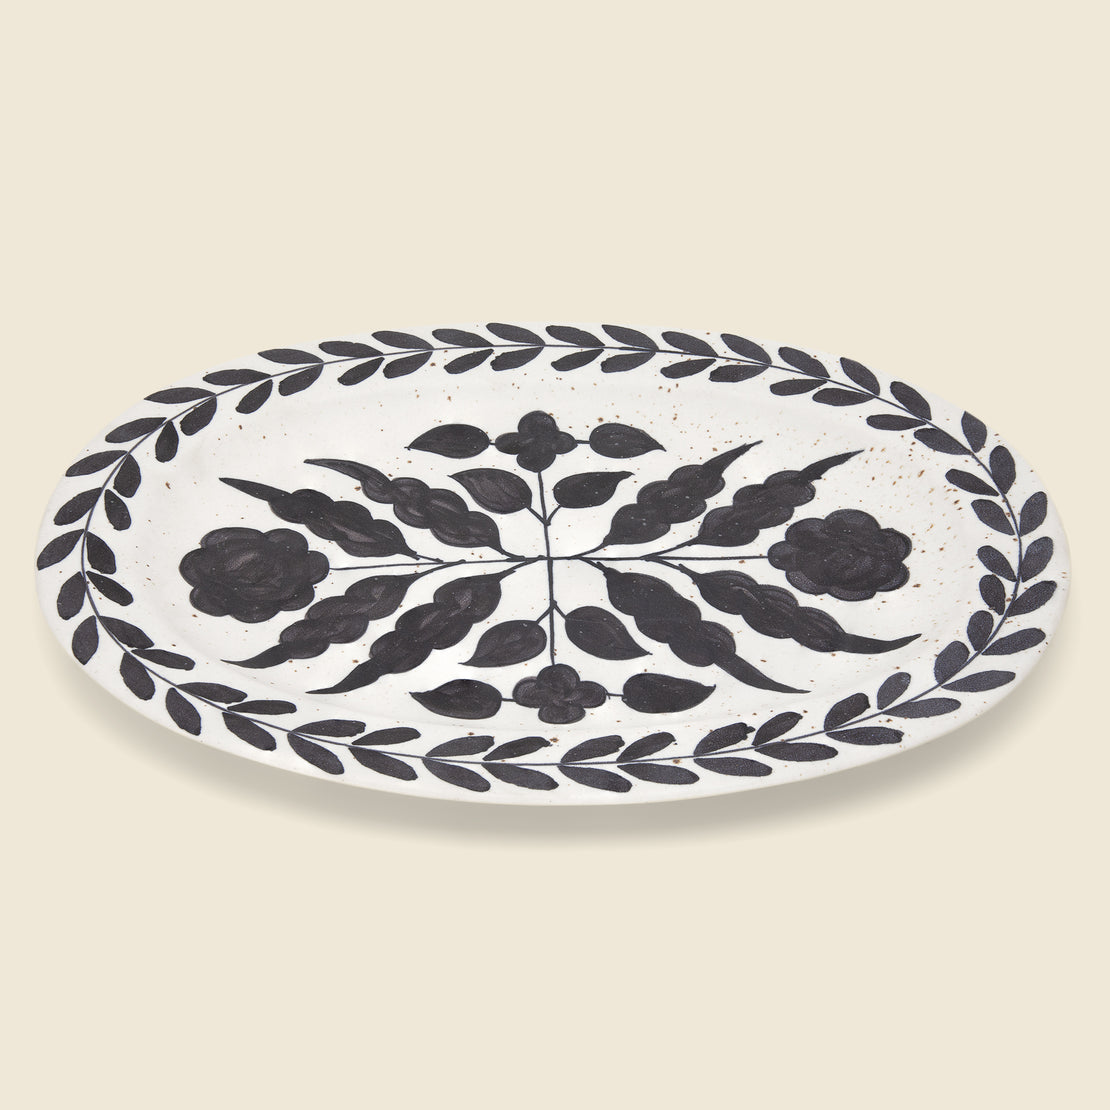 Home Hand Painted Floral Design Stonewater Platter - Black/Cream